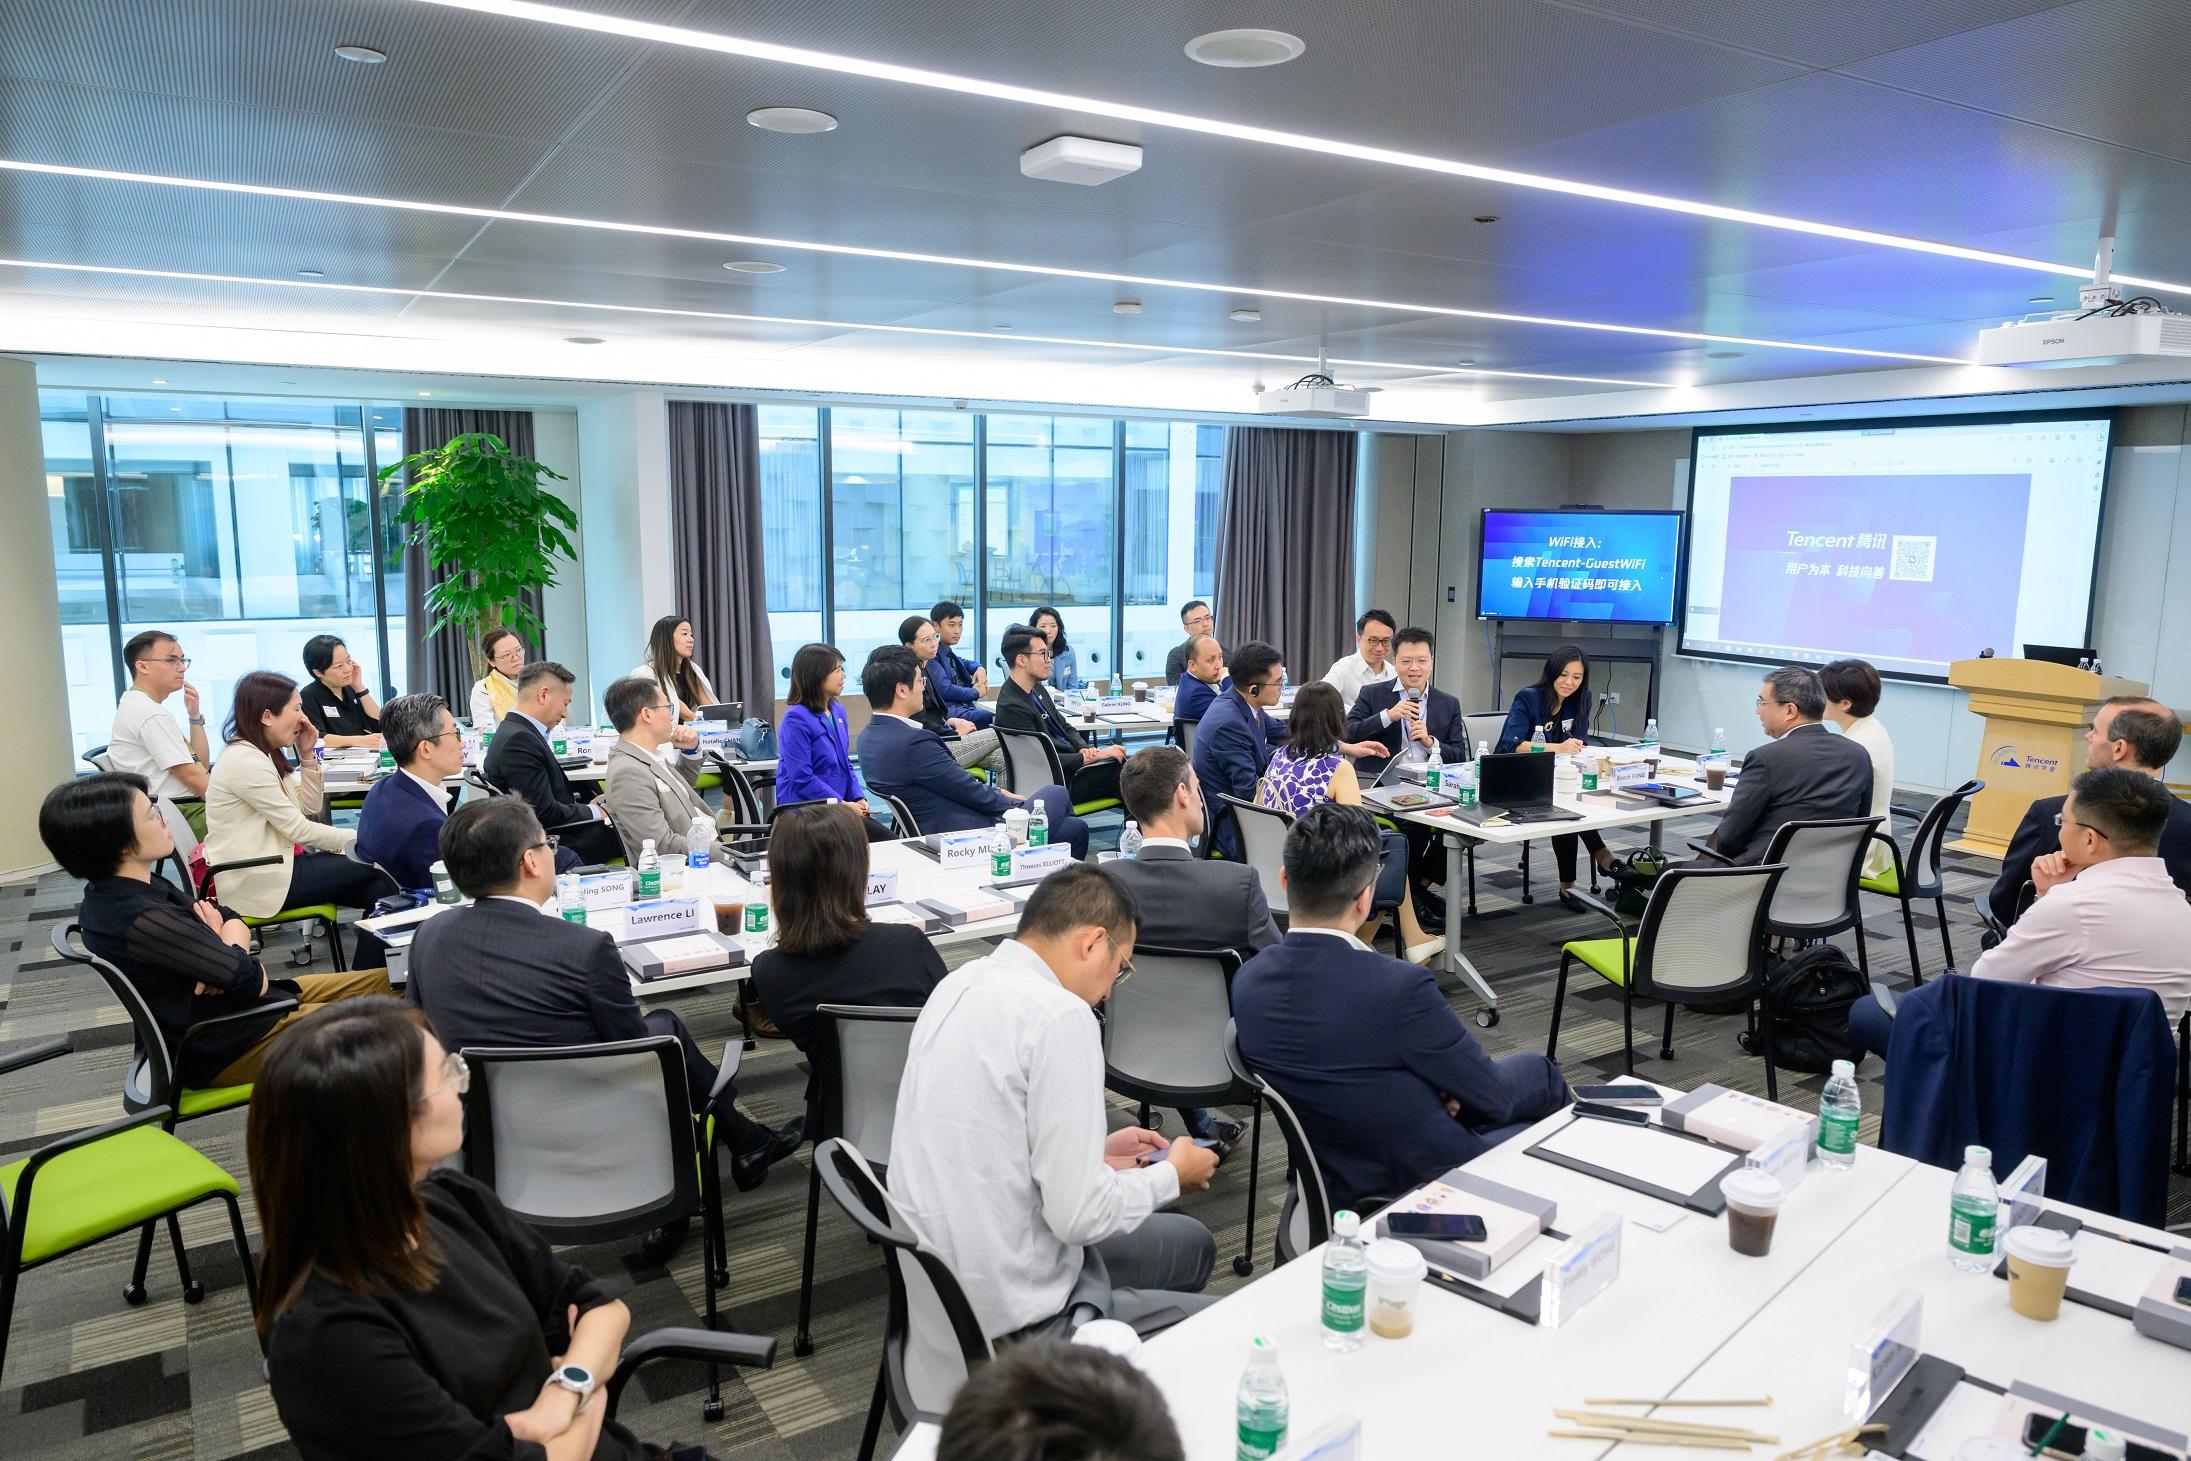 A delegation of participants of the Hong Kong Academy of Finance Financial Leaders Programme (FLP) completed the inaugural FLP field trip to Shenzhen from September 24 to 27. The FLP cohorts have face-to-face dialogues with senior executives from leading Fintech firms.